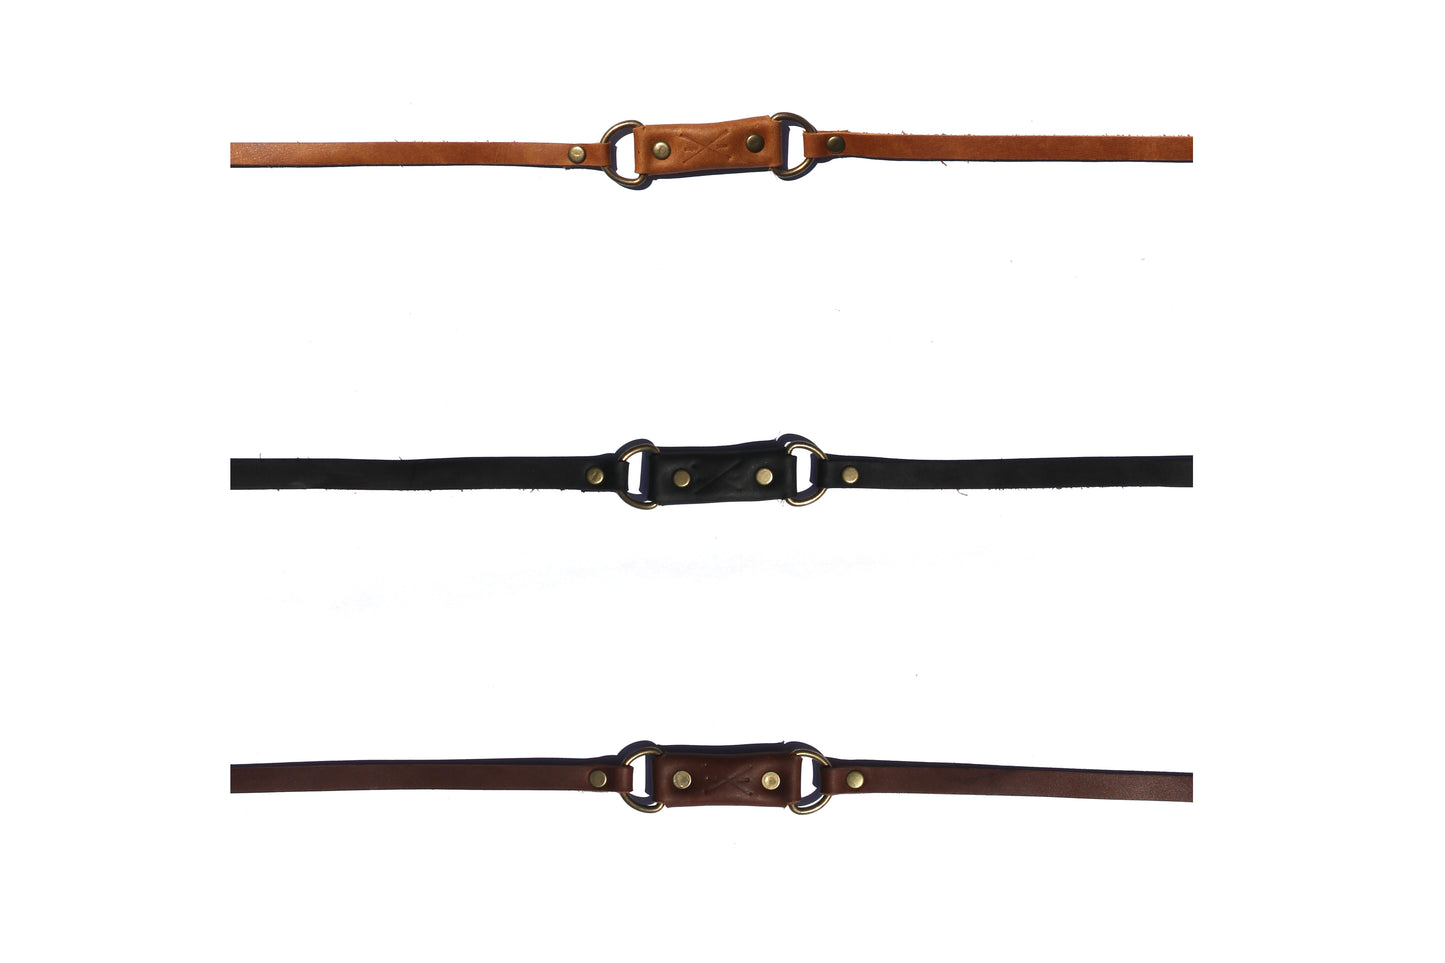 GENUINE LEATHER SPECTACLE STRAP